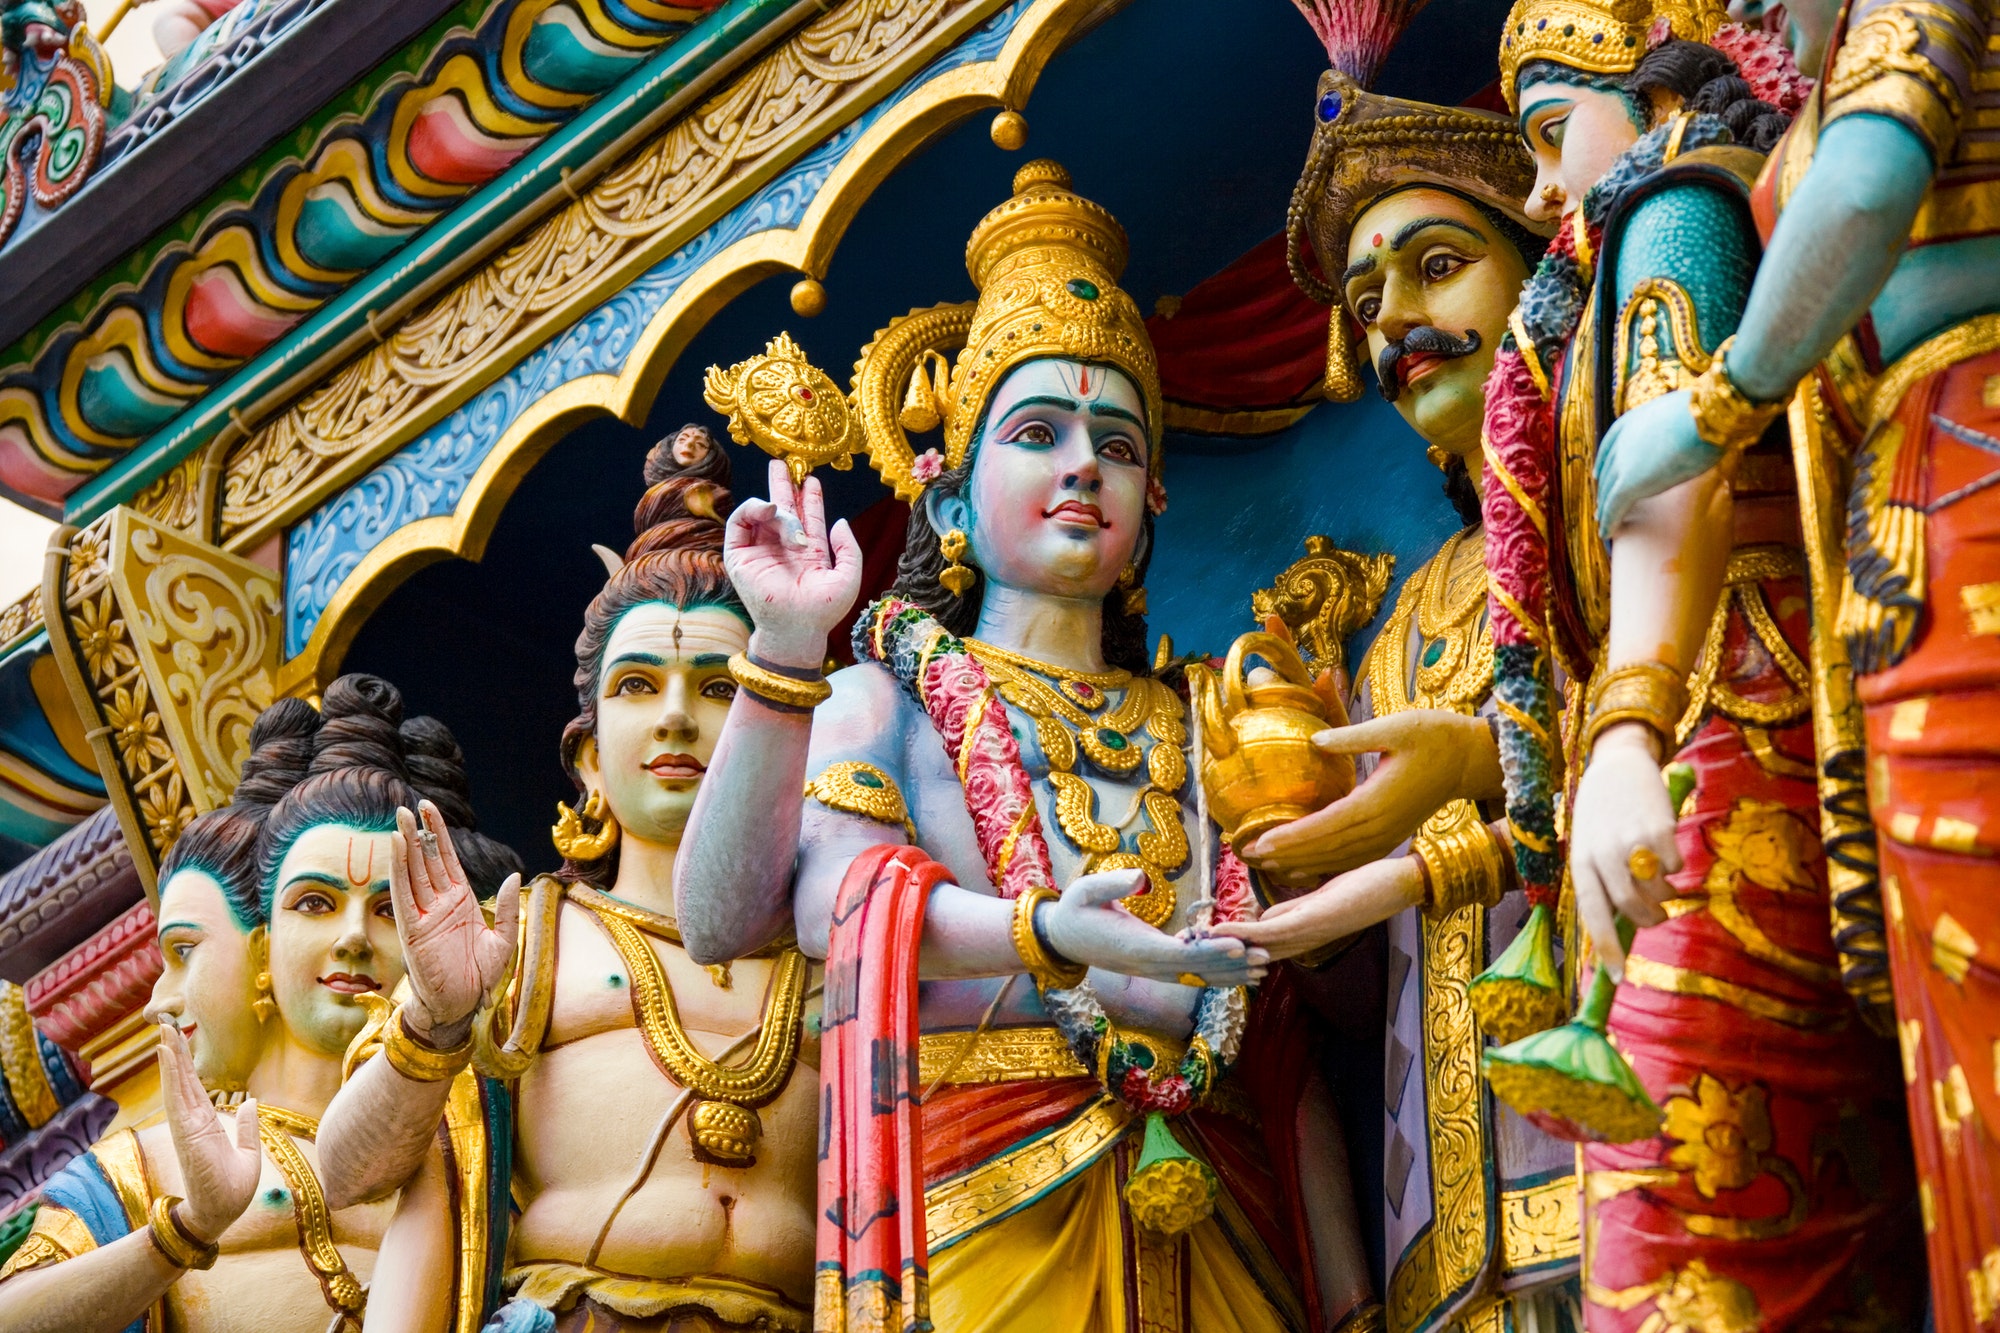 Colorful statues of Hindu gods on the exterior of the Sri Krishnan Hindu Temple in the city of